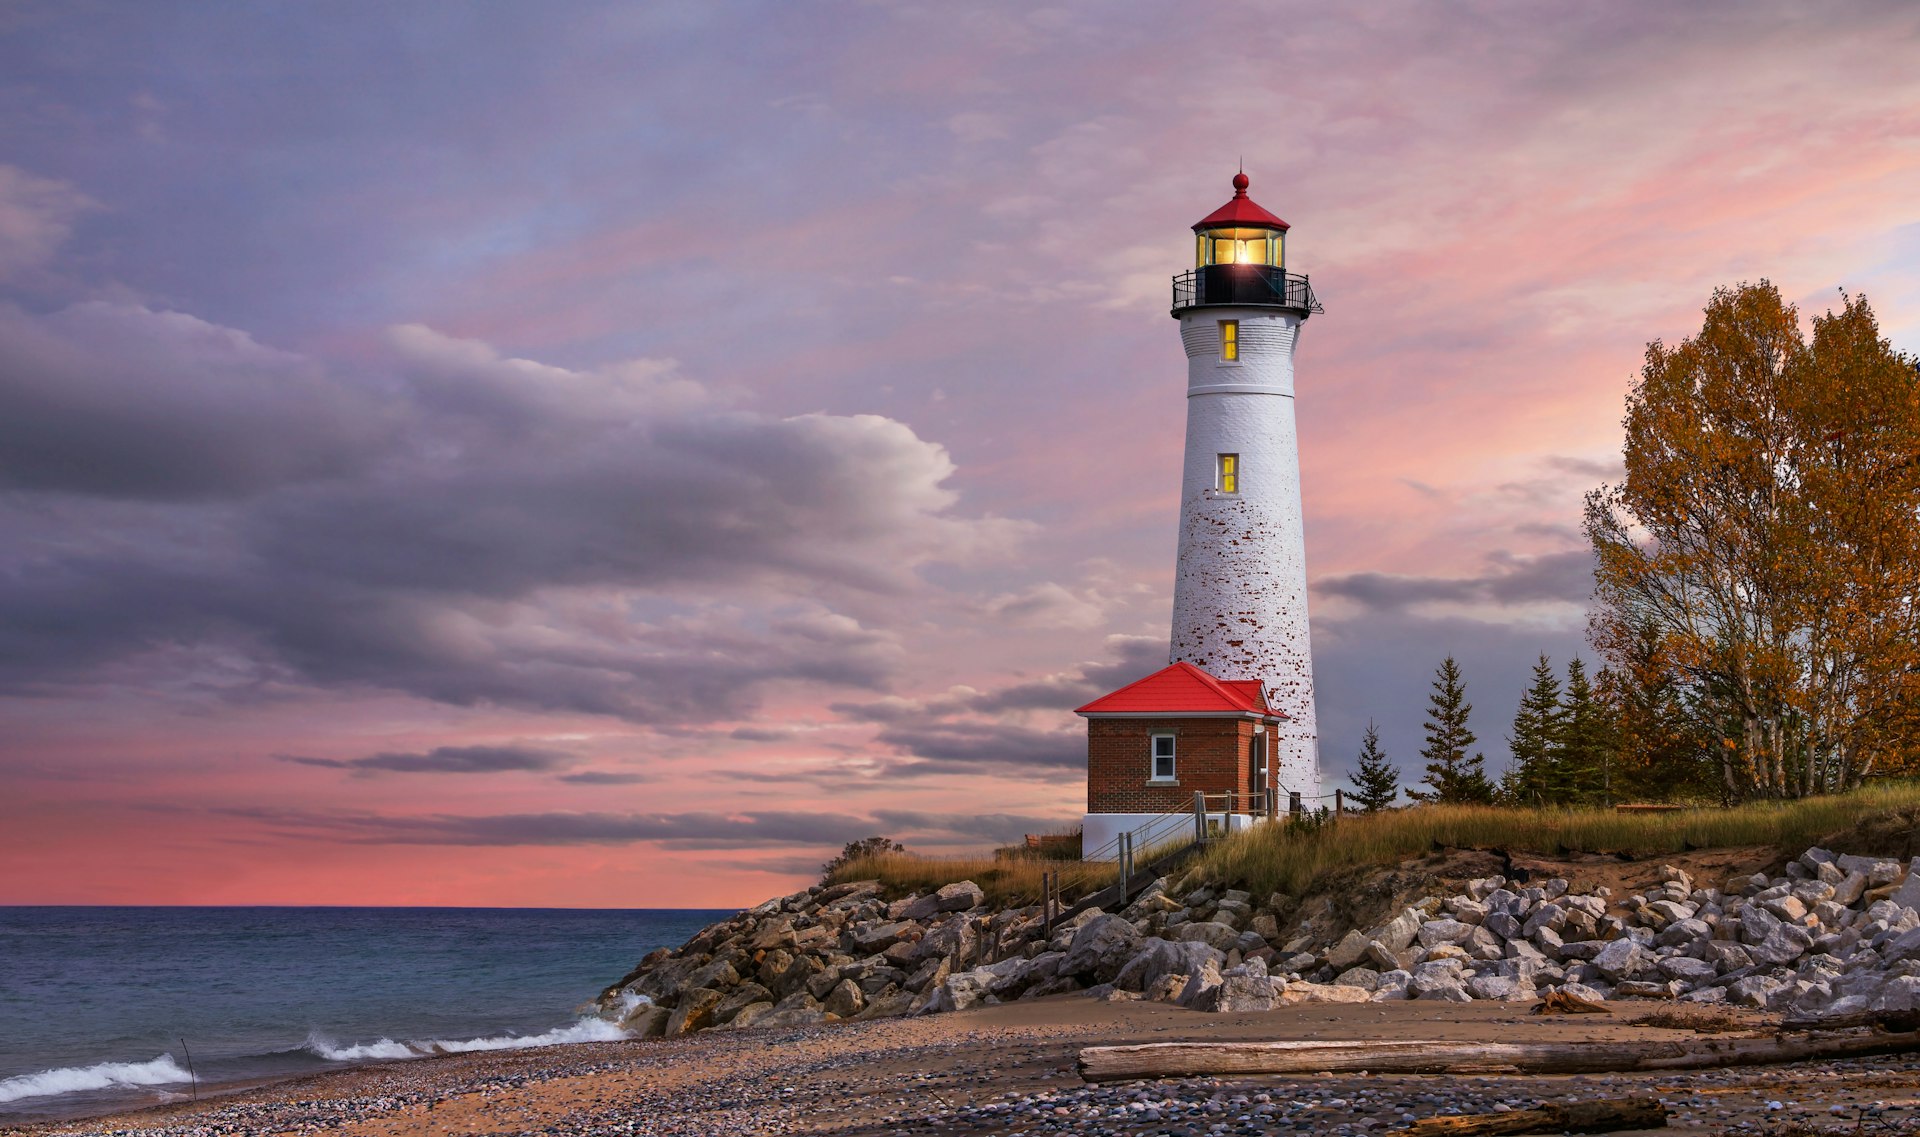 Crisp Point Lighthouse at sunset in Michigan